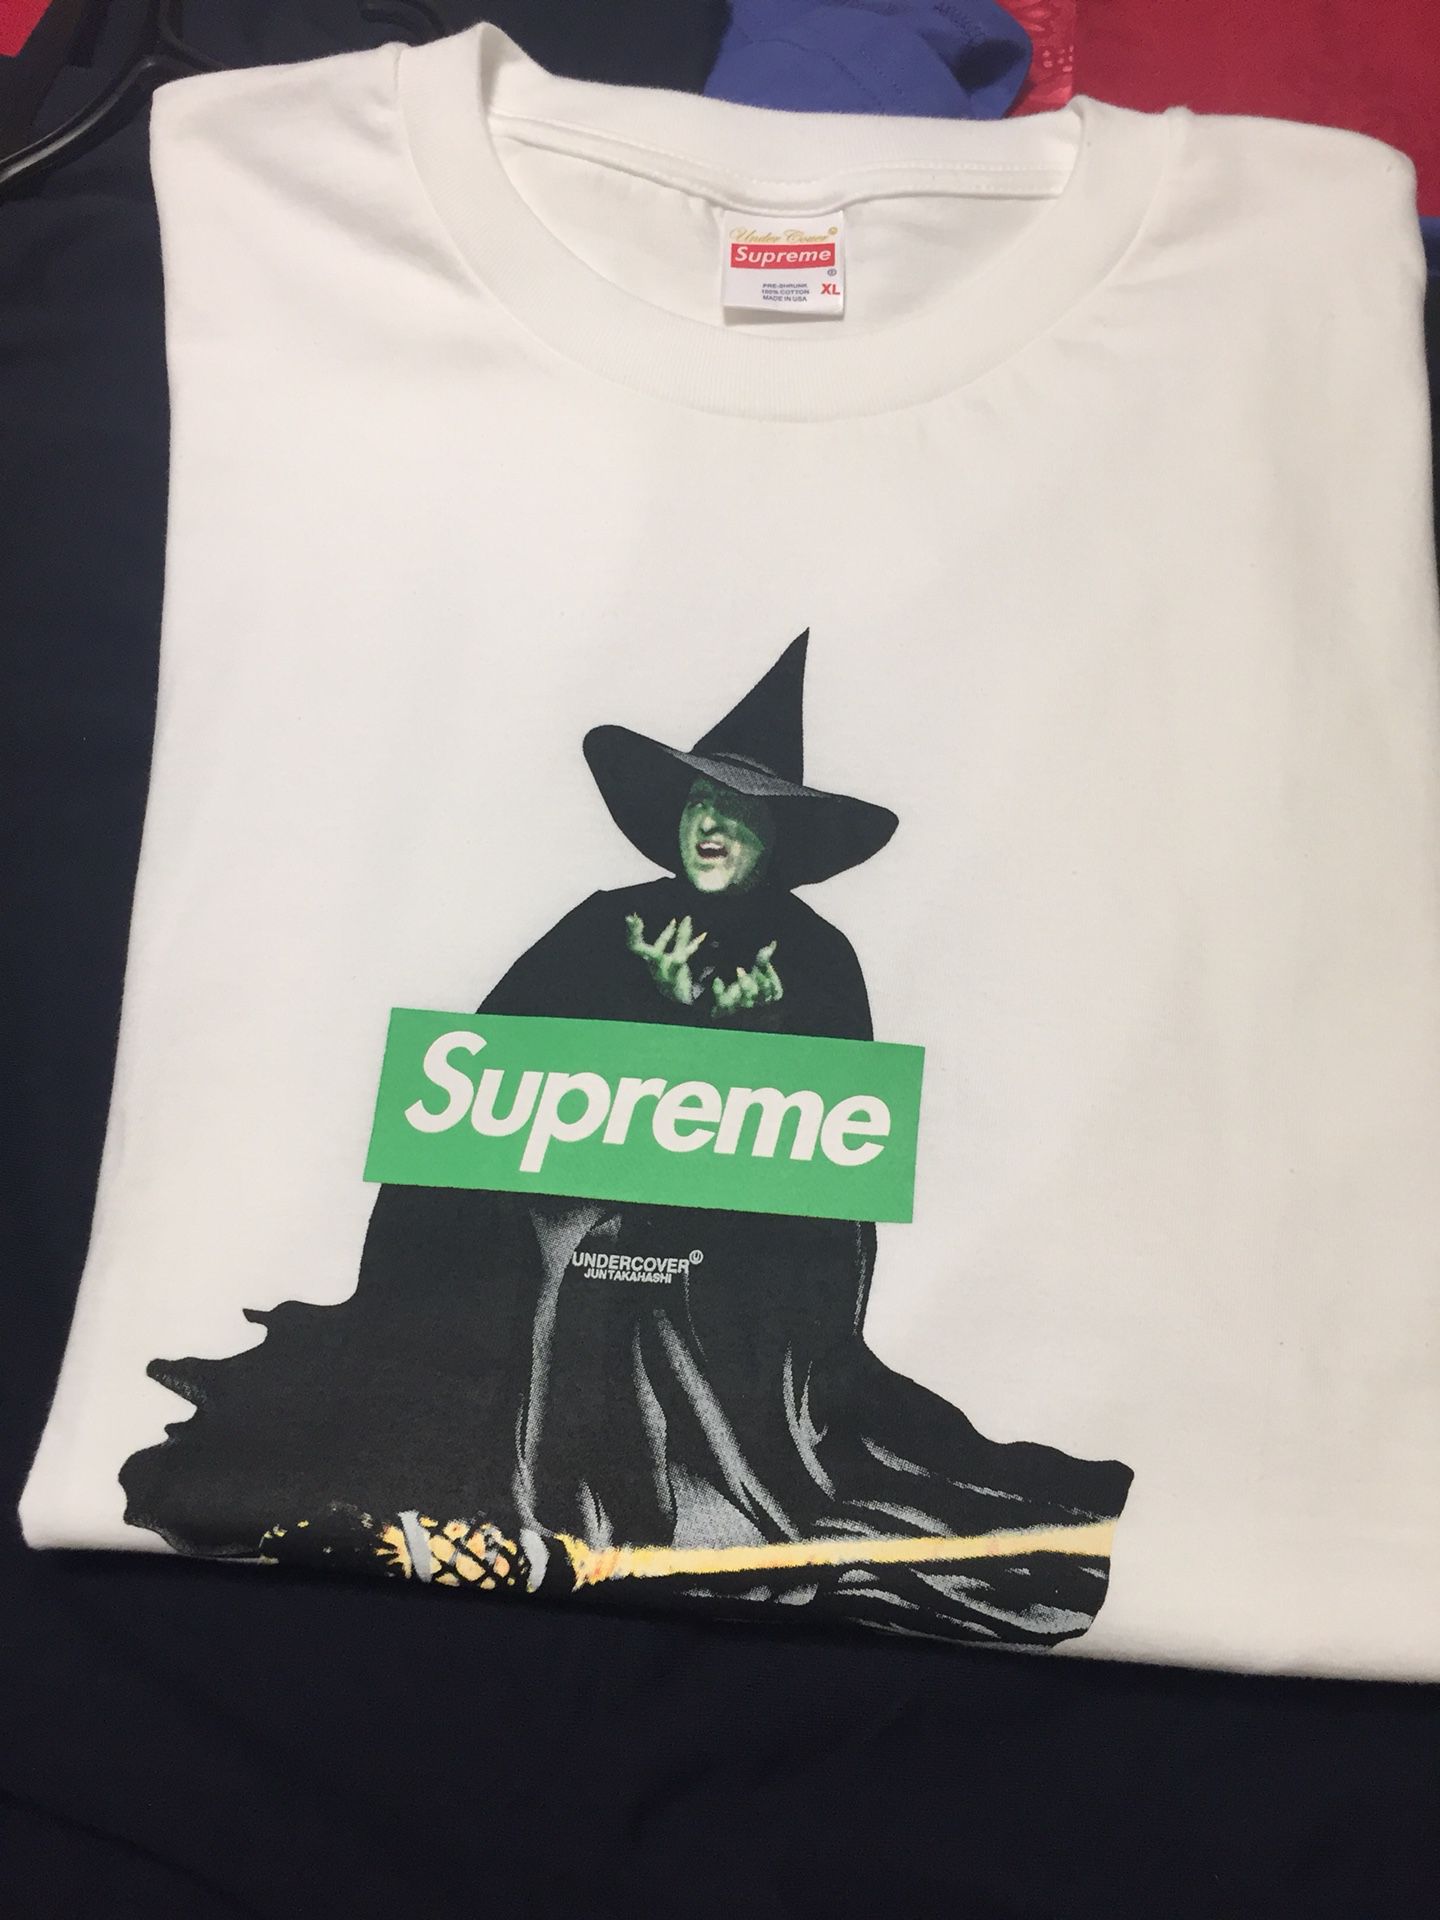 Supreme x under cover witch tee